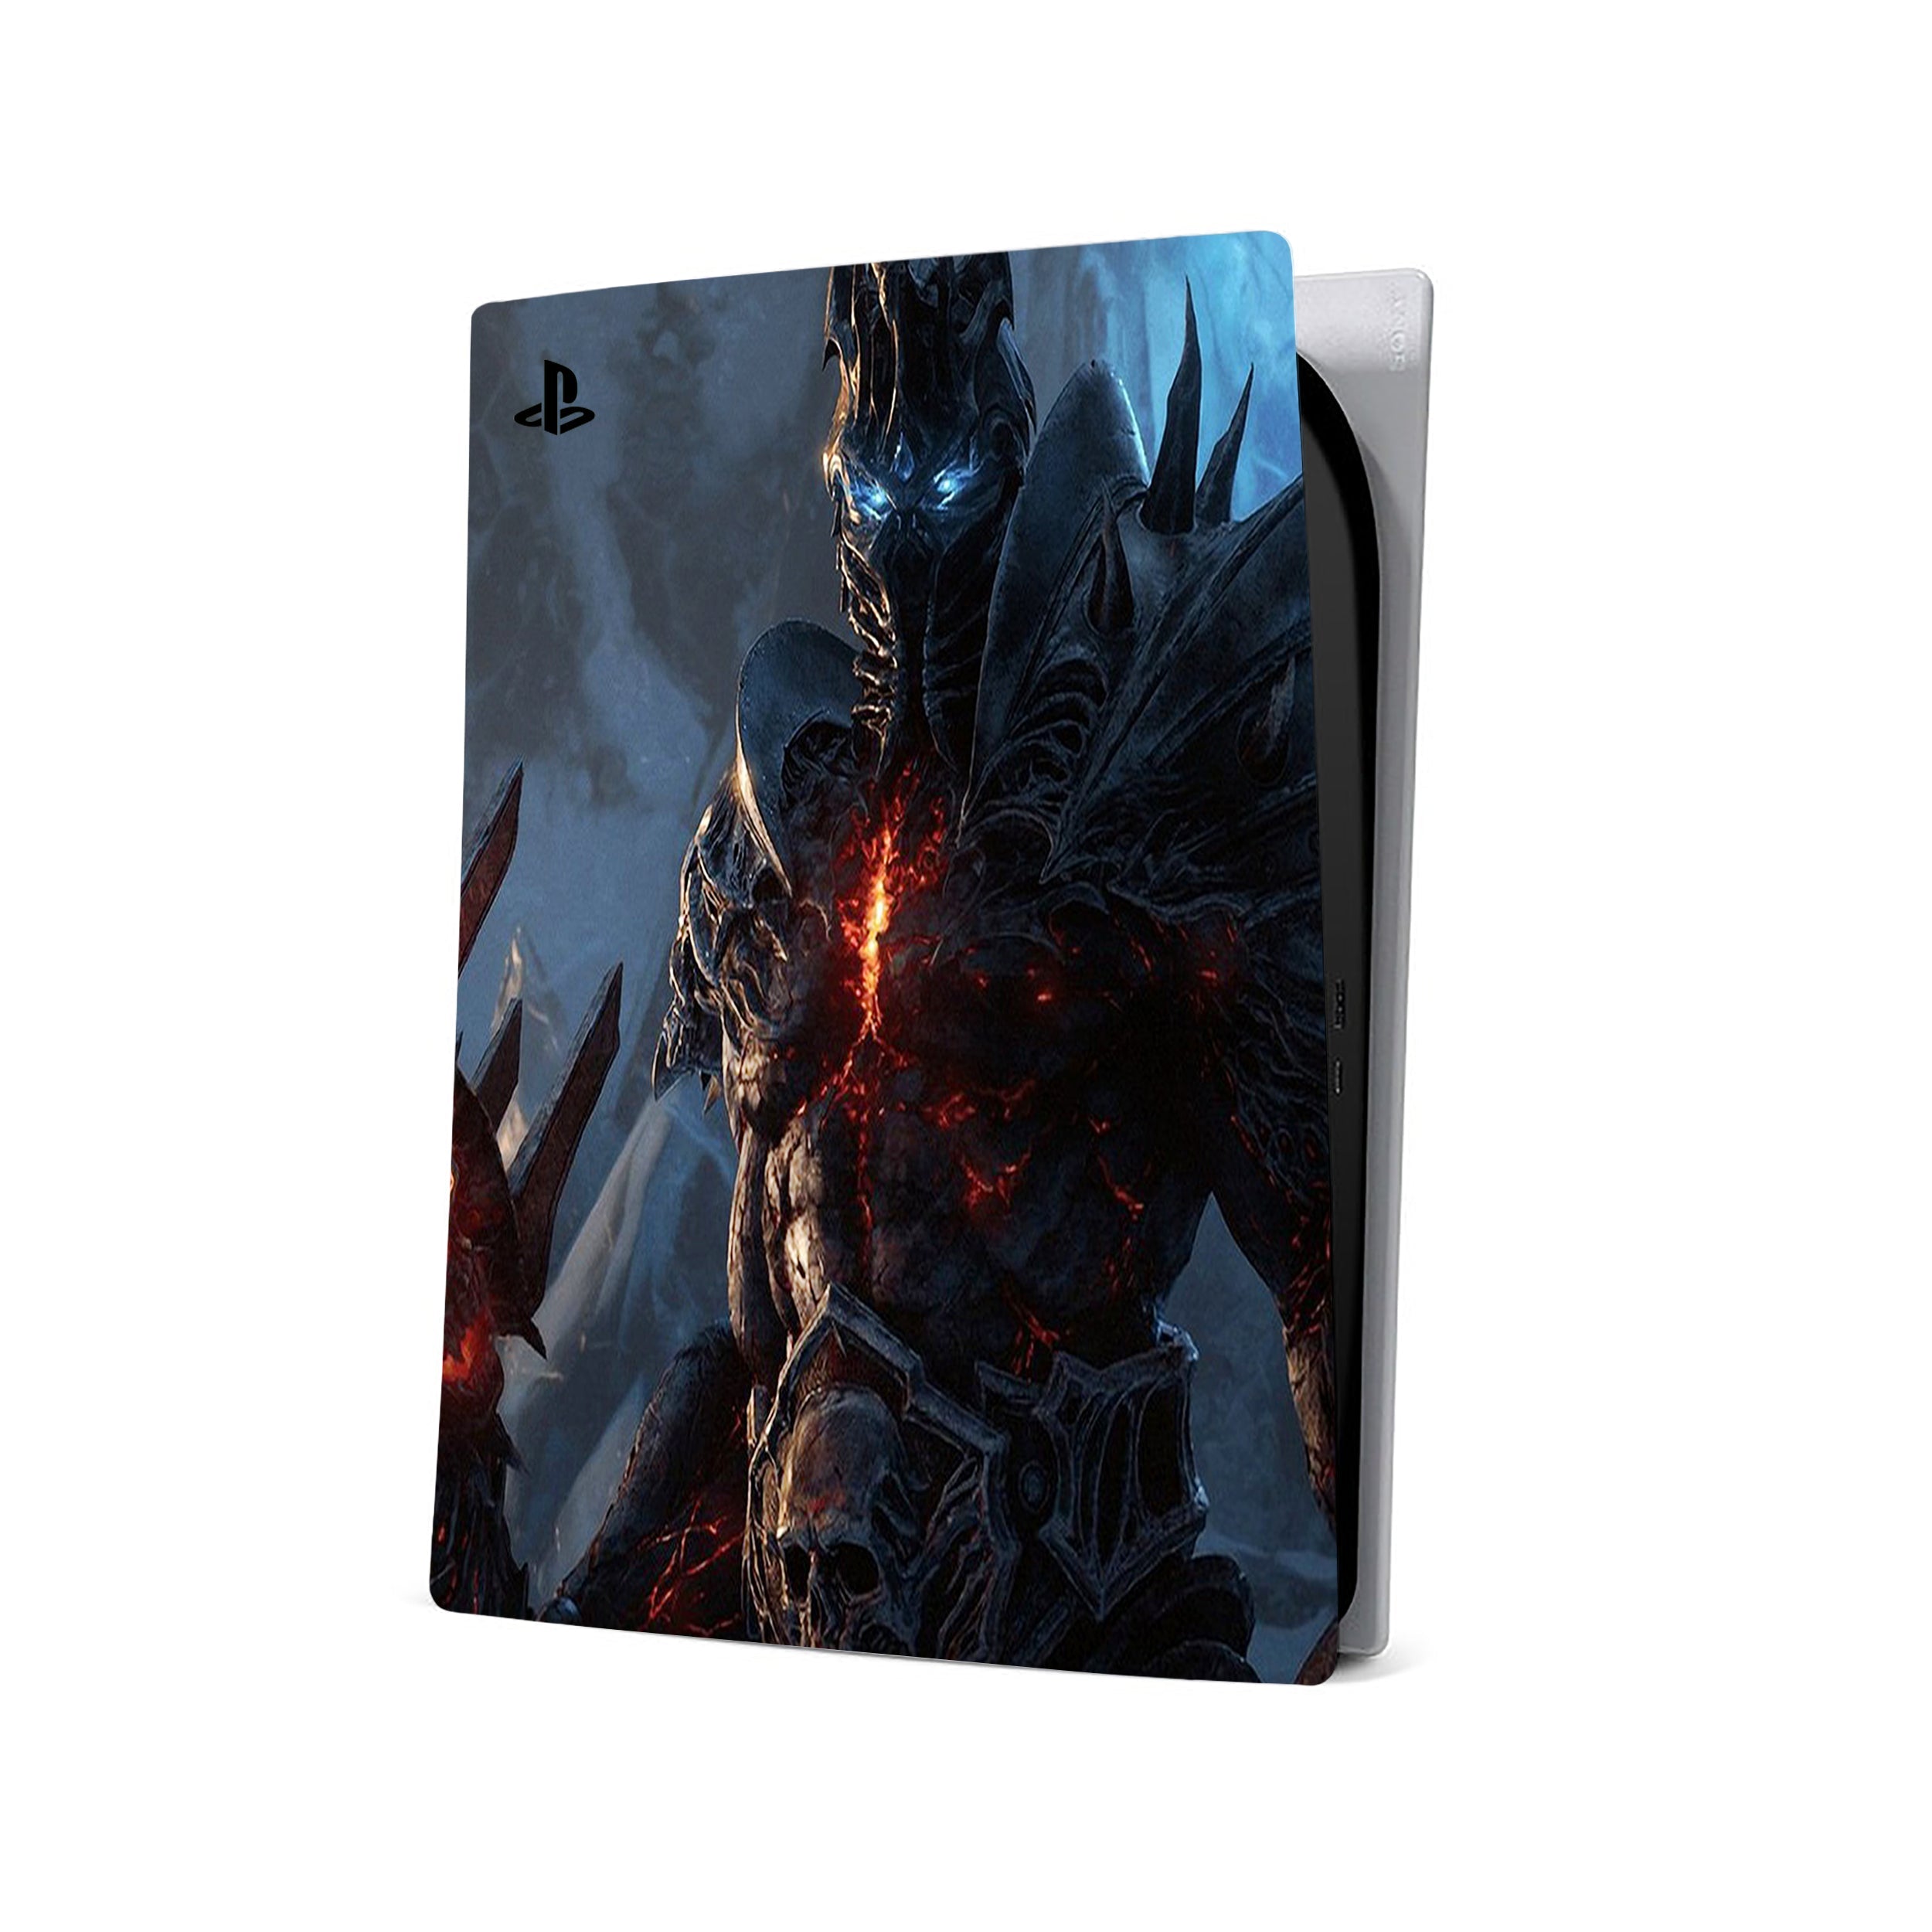 A video game skin featuring a World of Warcraft design for the PS5.